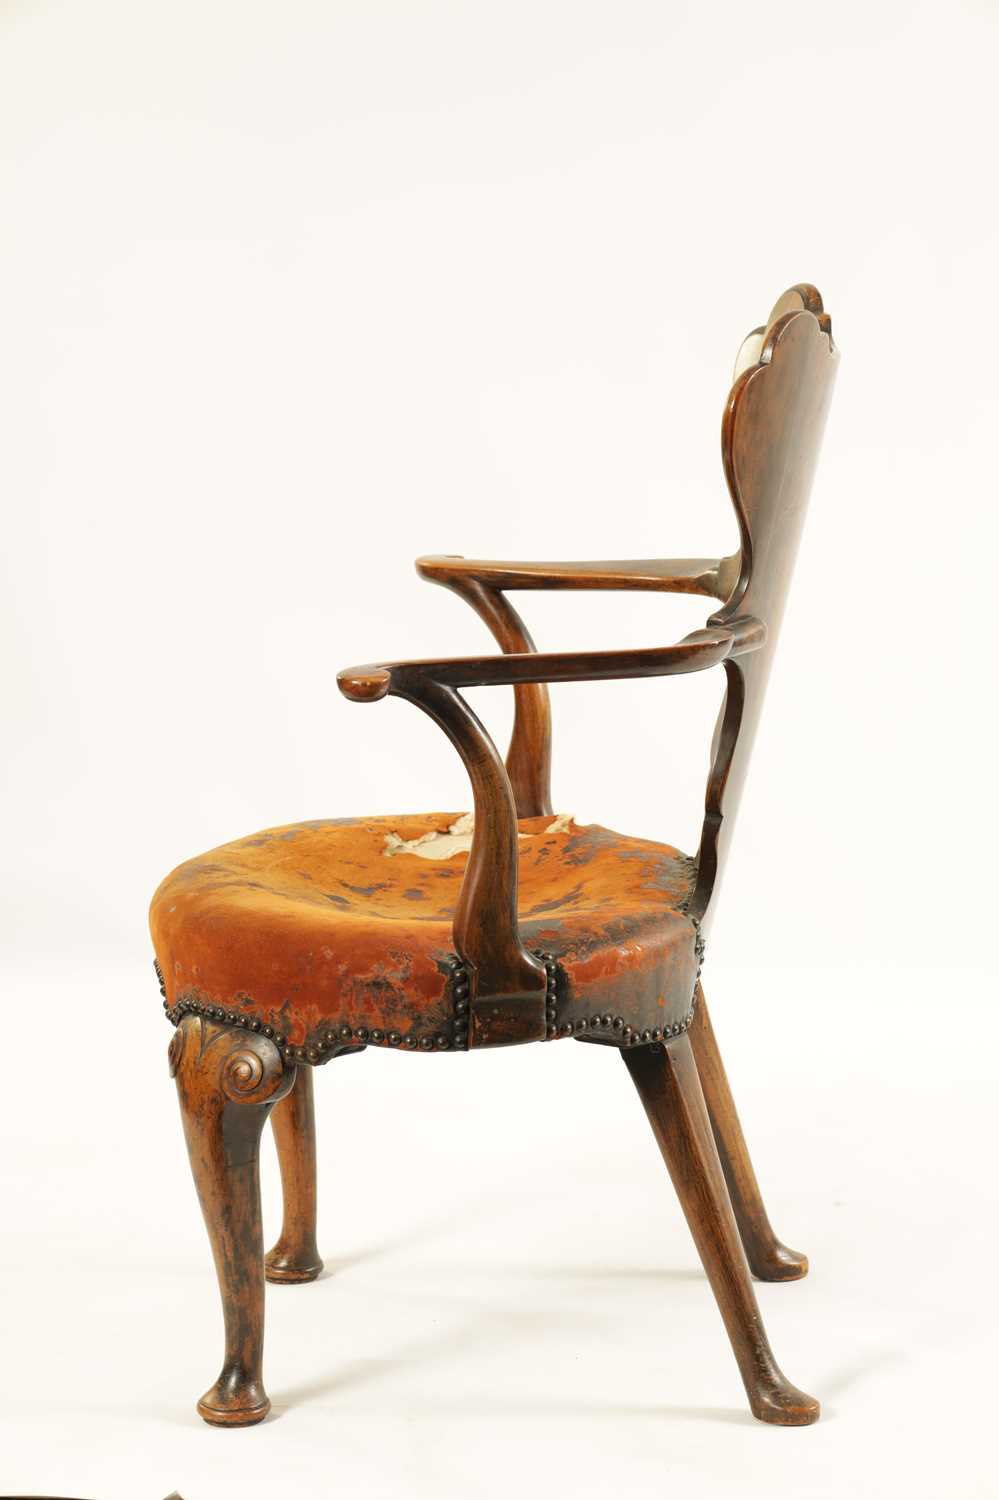 AN EARLY 20TH CENTURY WALNUT OPEN ARMCHAIR IN THE MANER OF GILLOWS - Image 5 of 7